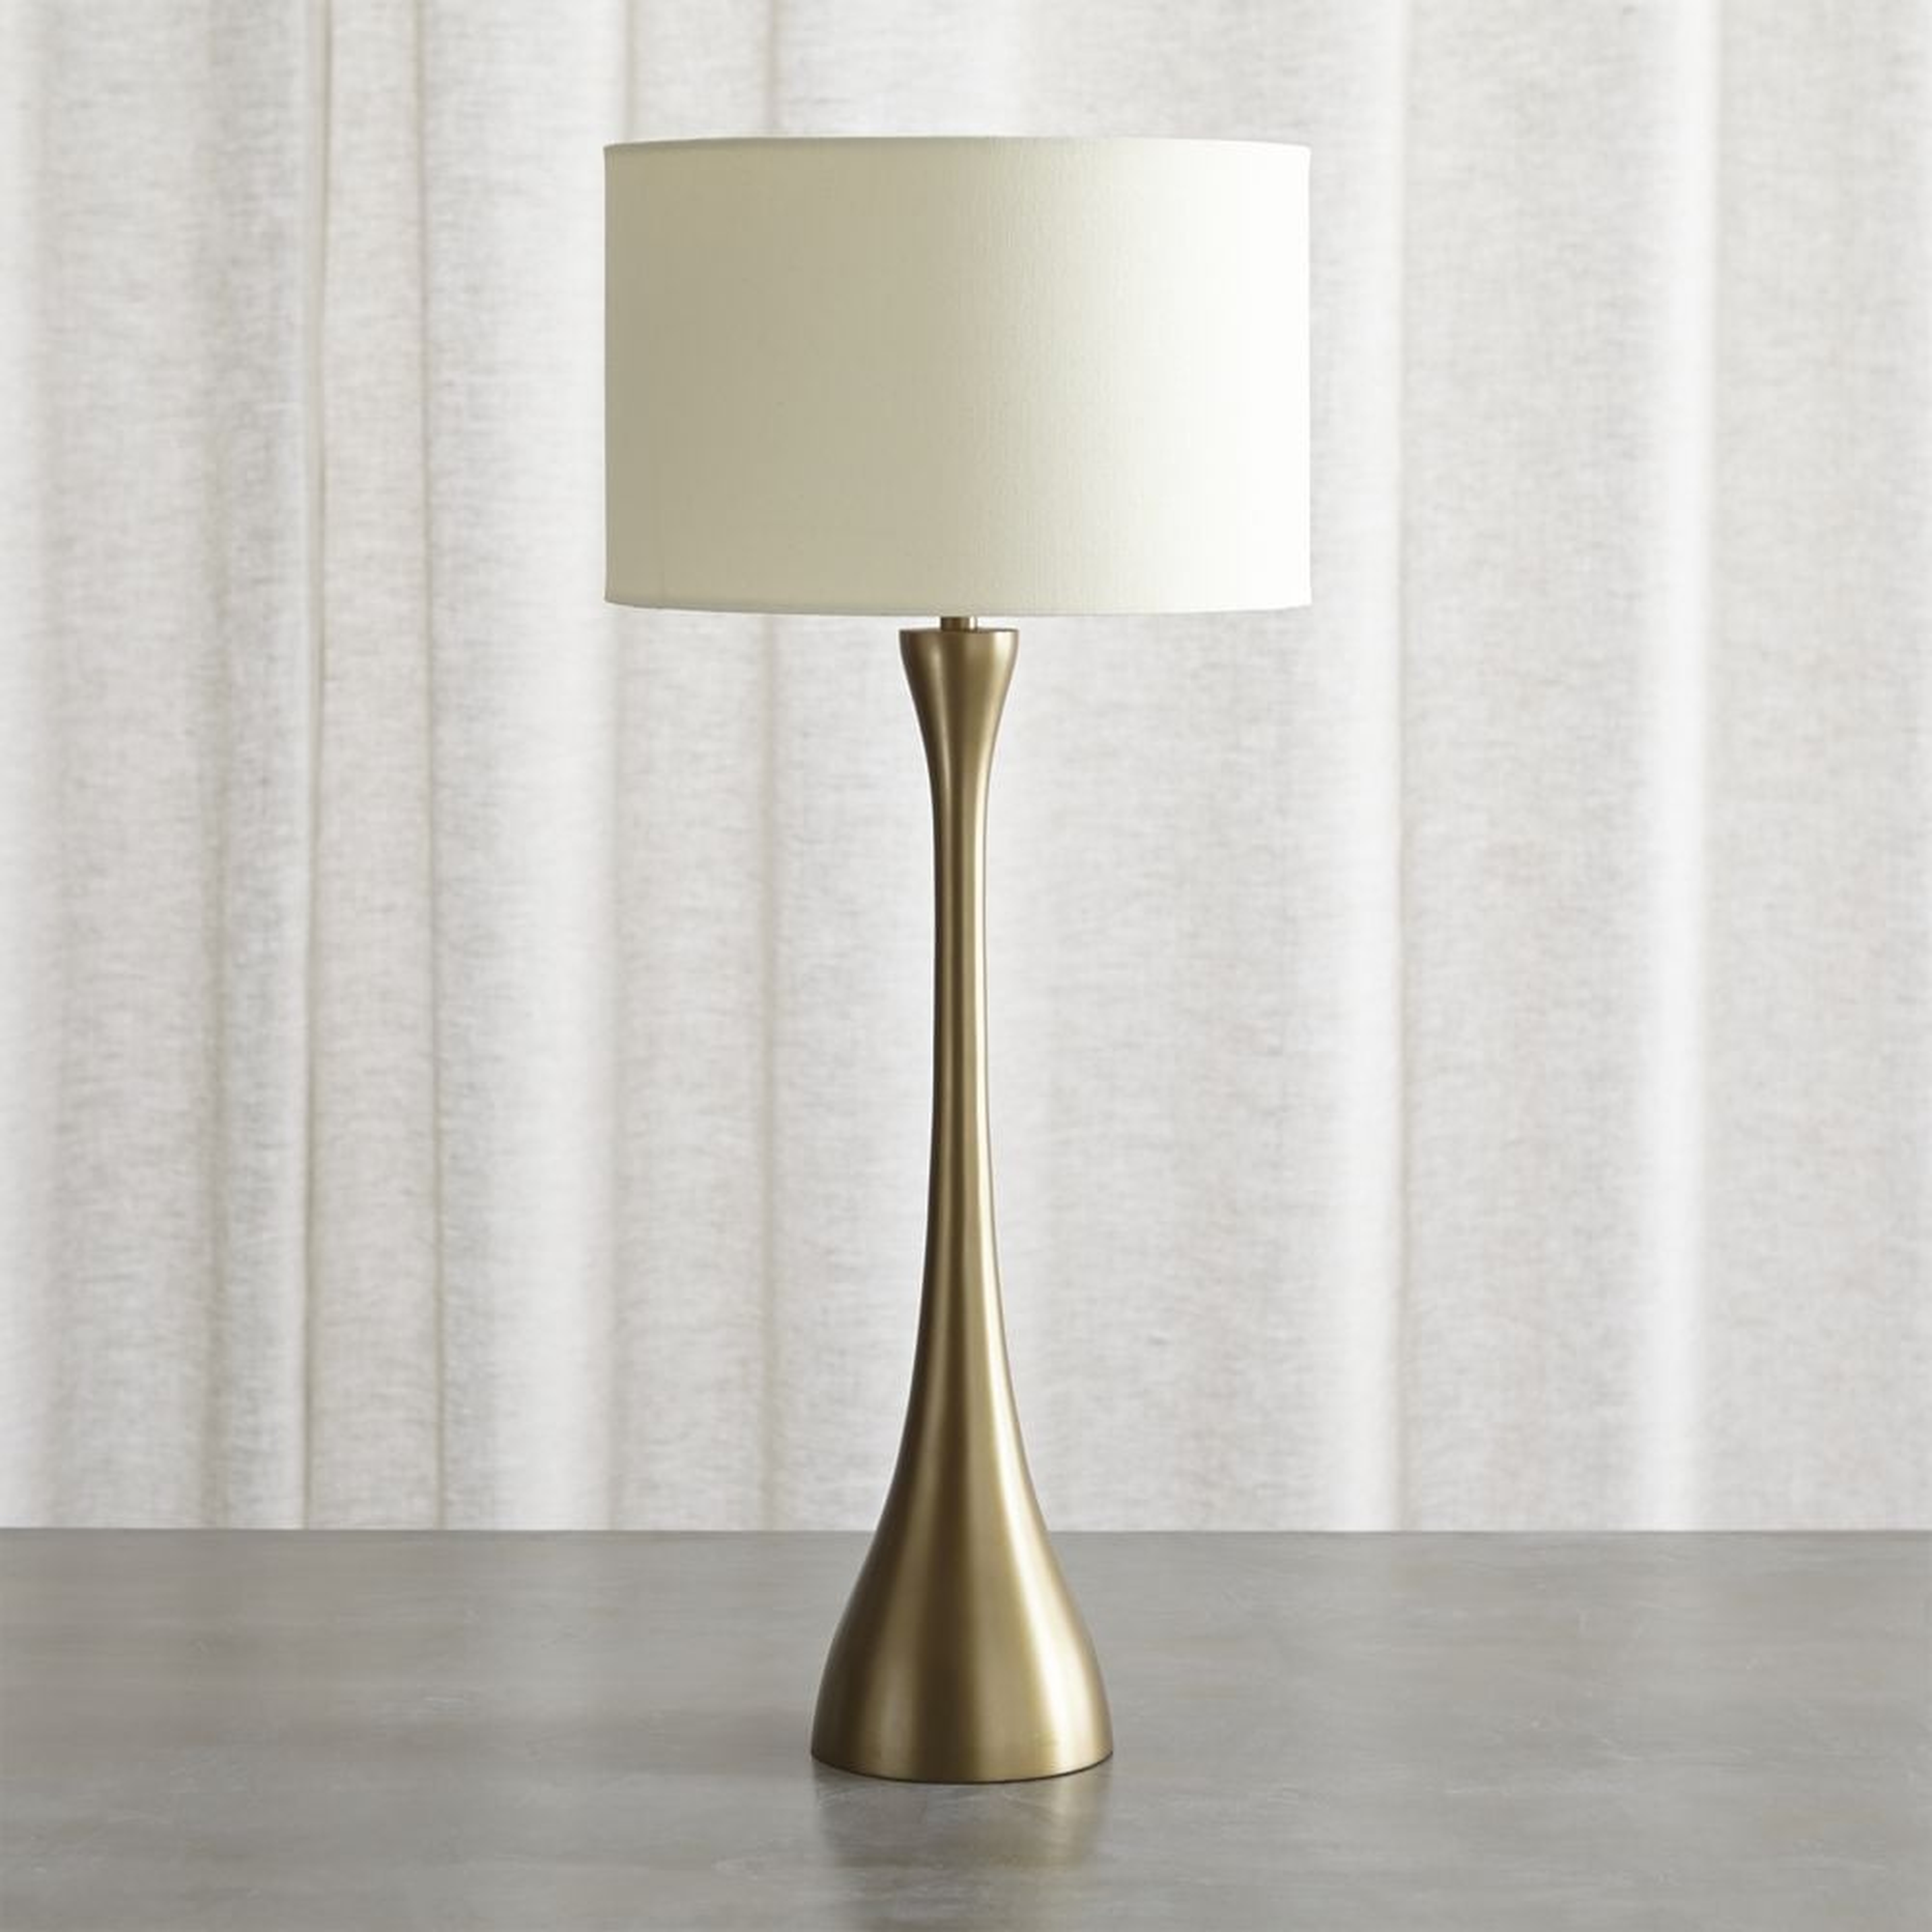 Melrose Brass Table Lamp - Crate and Barrel